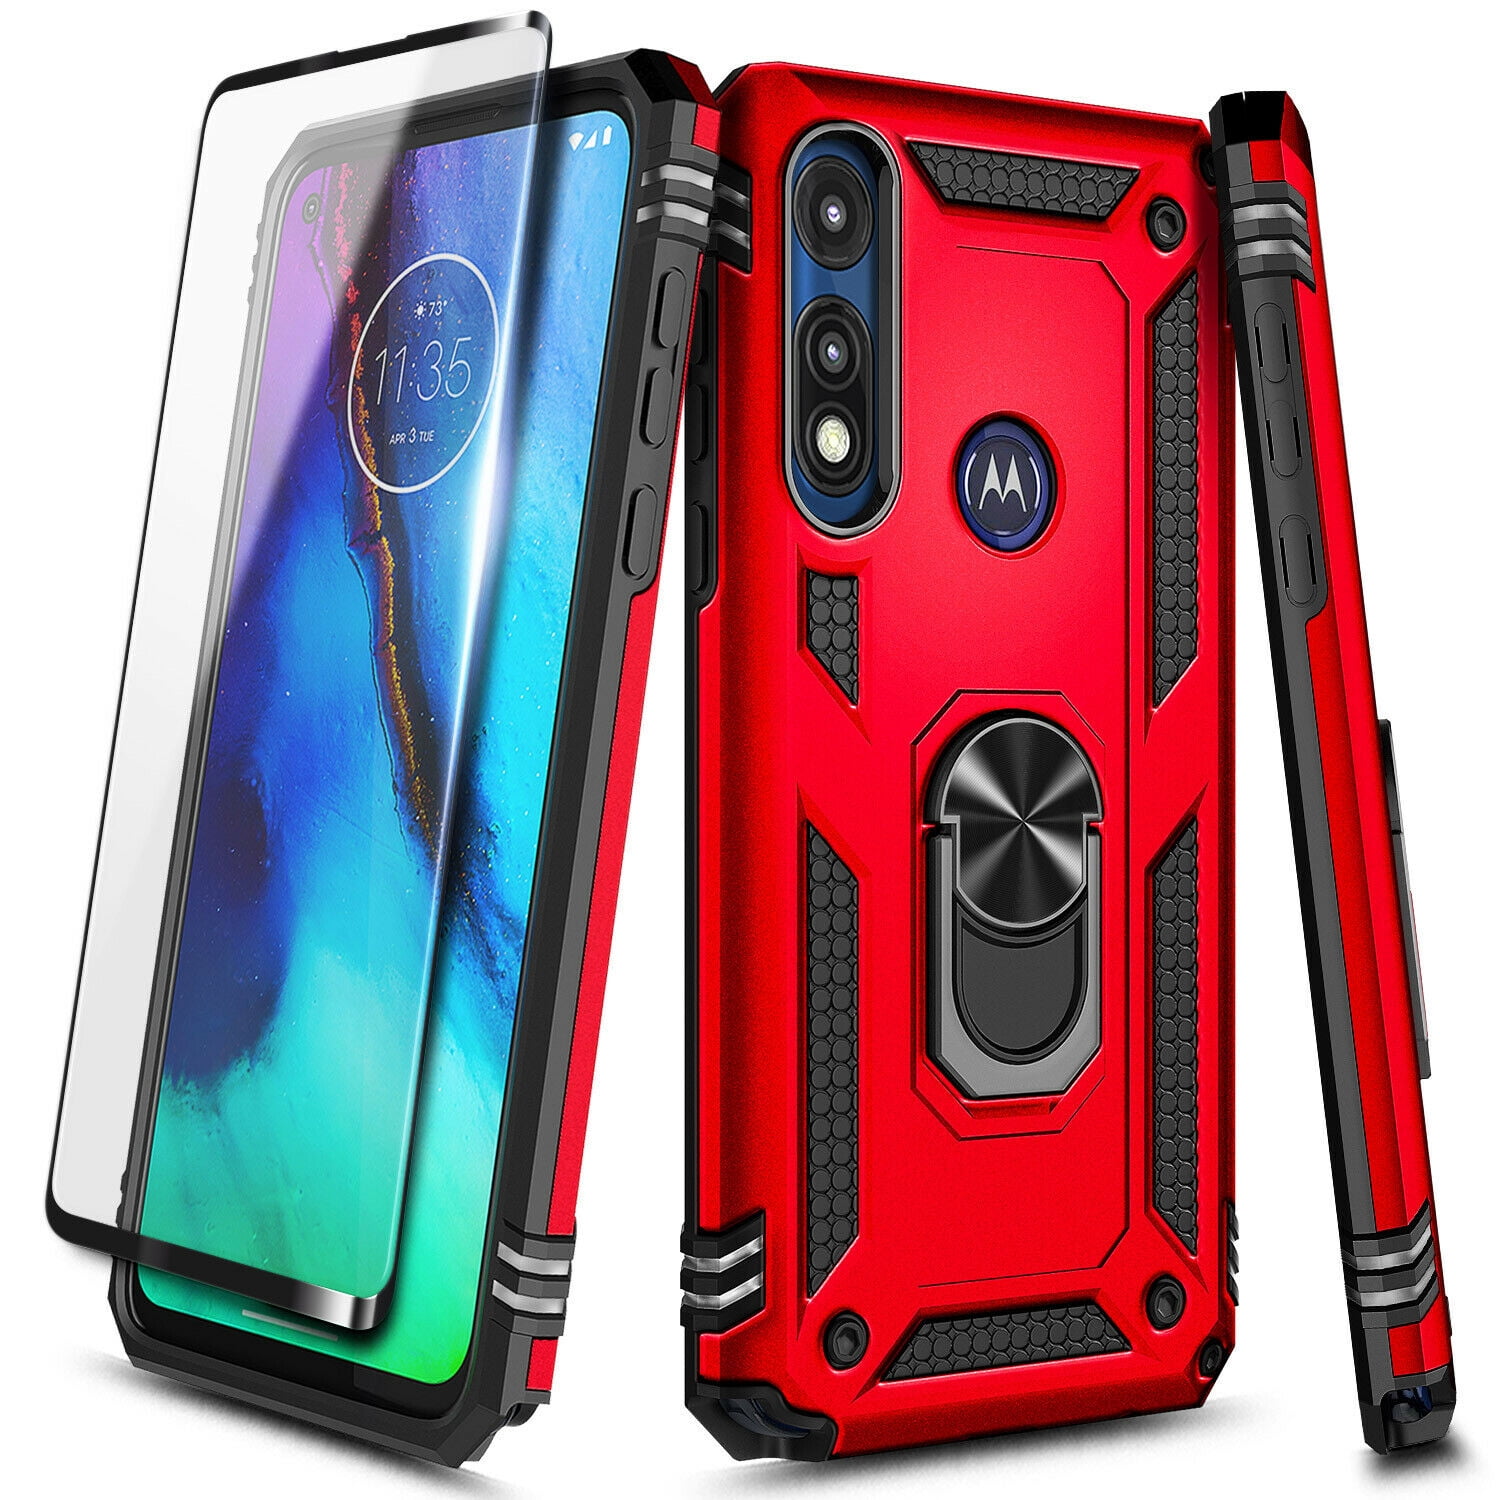 Telegaming Dual Layer Hybrid Tank Armor Case with Kickstand Shockproof Soft TPU & Tough PC Back Cover,Red Flyme for Moto E 2020 Case,Moto E7 Case with Tempered Glass Screen Protector